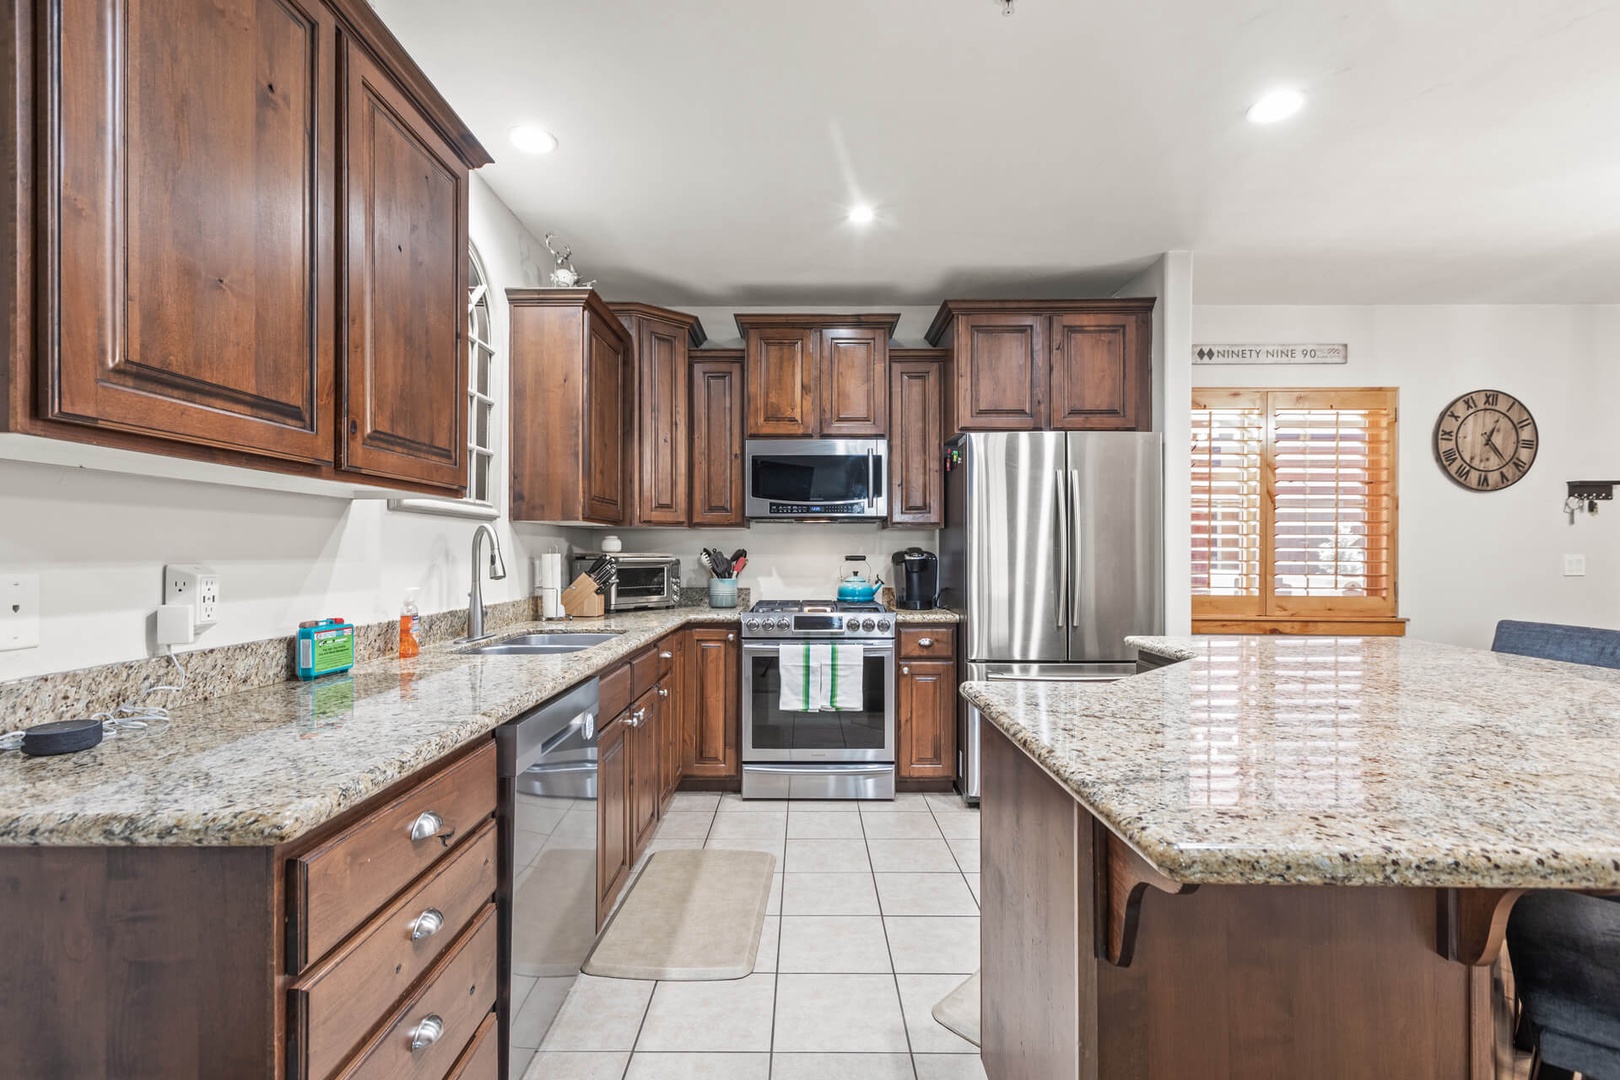 Bear Hollow Lodges 4203: Complete with a gas range, stainless steel refrigerator, microwave oven, and dishwasher, this chef-worthy space has elegant wood cabinetry and tons of counter space.